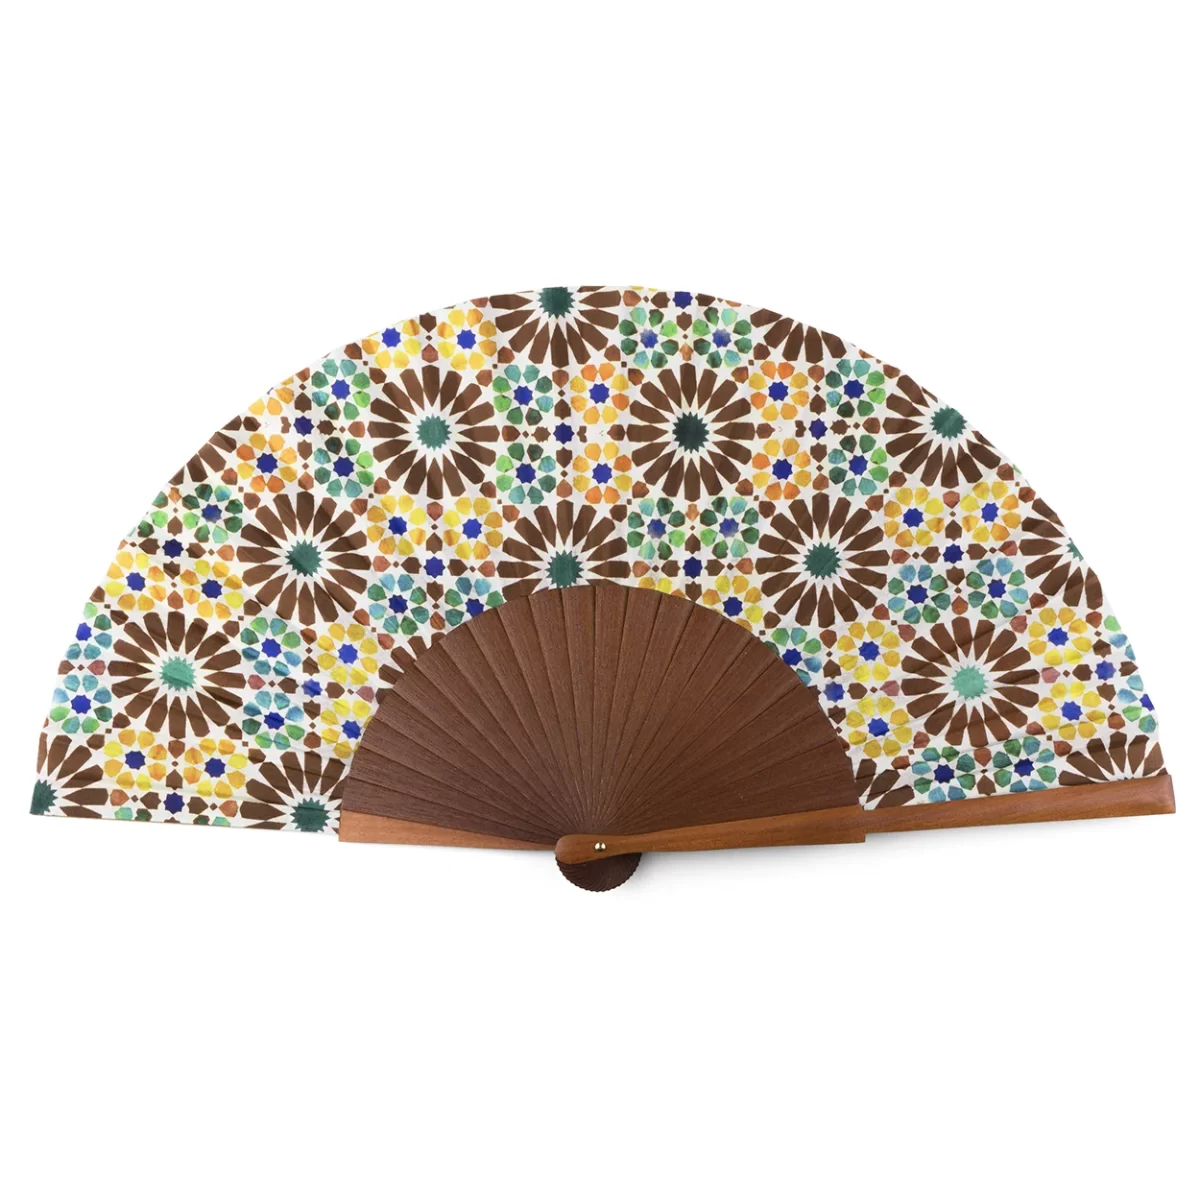 Silk Fan with Arabesques Inspired by the Alhambra of Granada.